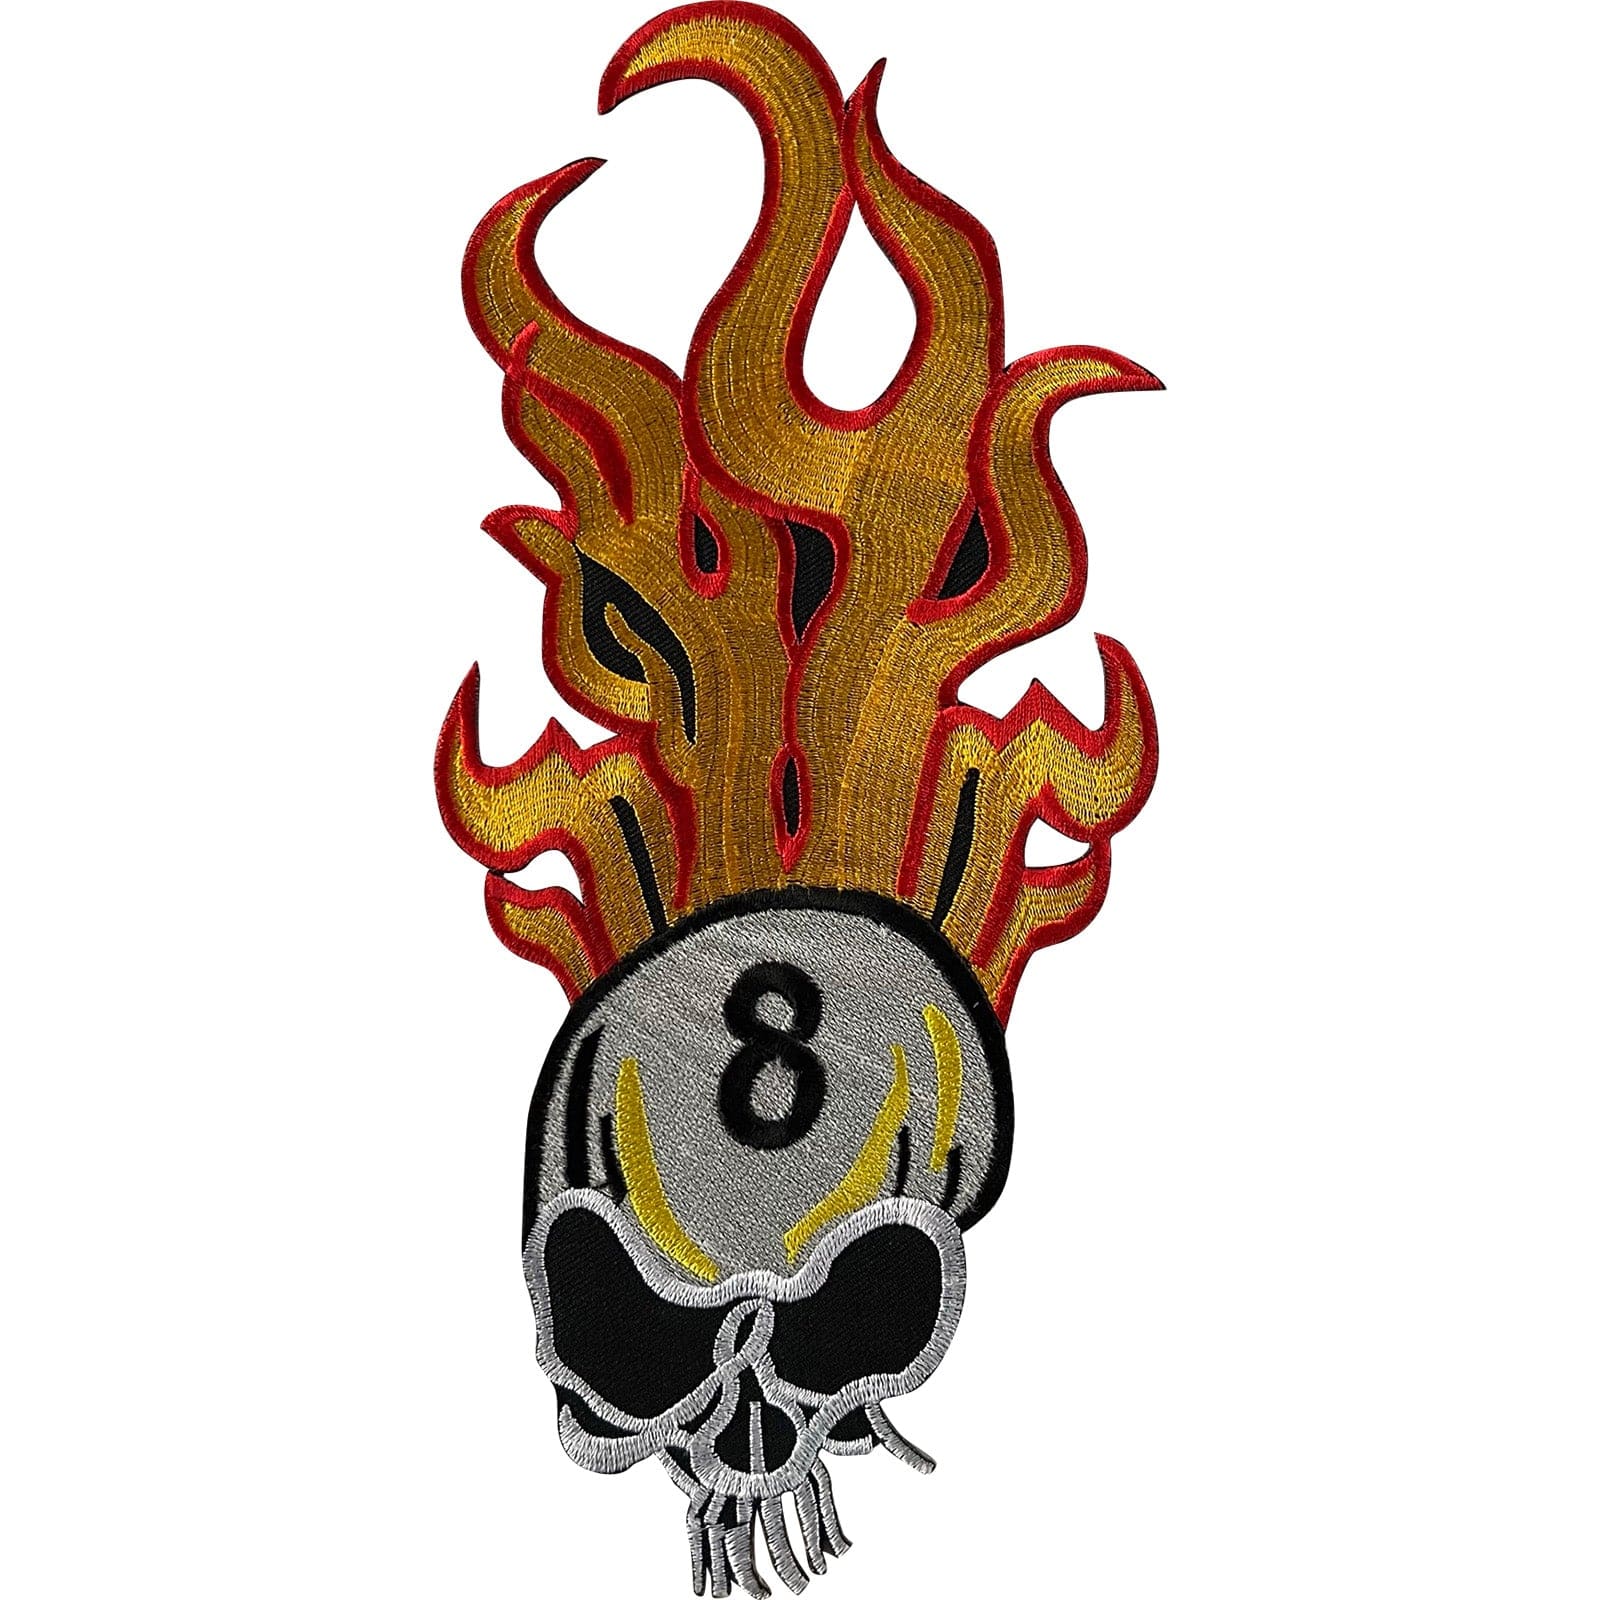 Large Flaming Skull Number 8 Patch Iron Sew On Clothes Embroidery Badge Applique